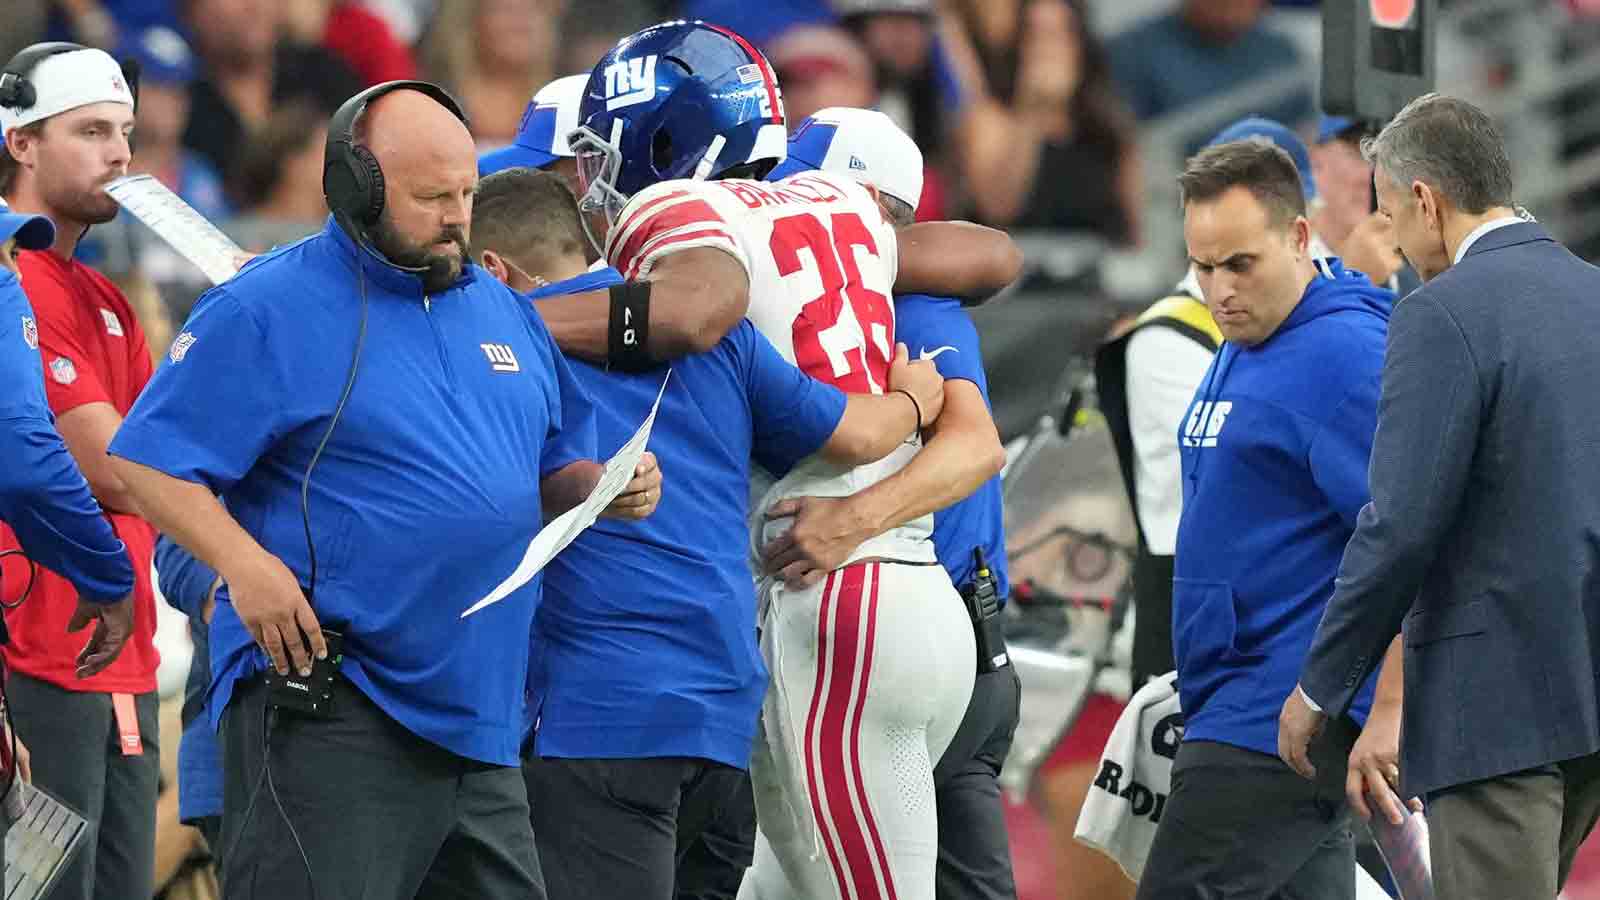 Saquon Barkley to miss three weeks with ankle sprain, per report